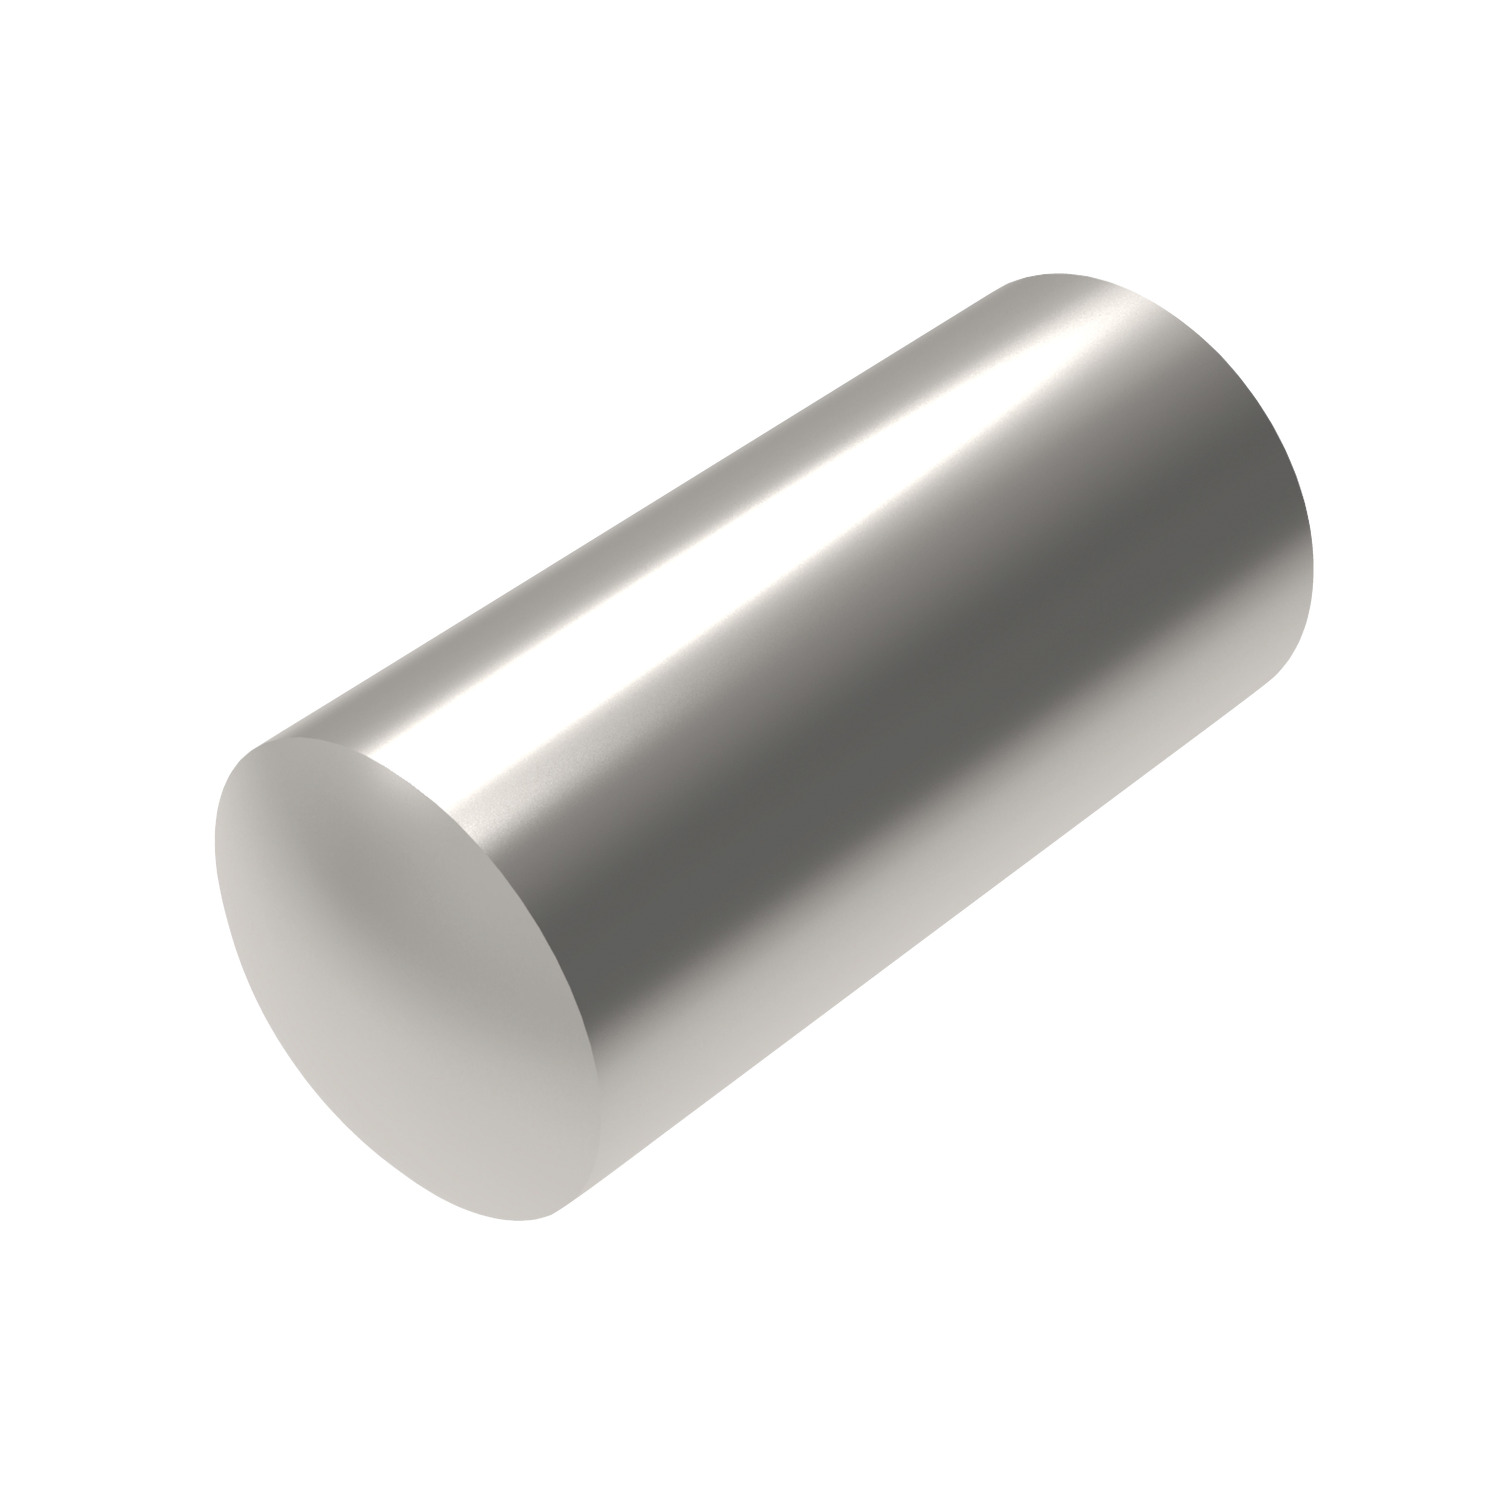 P1207 Stainless Dowel Pins